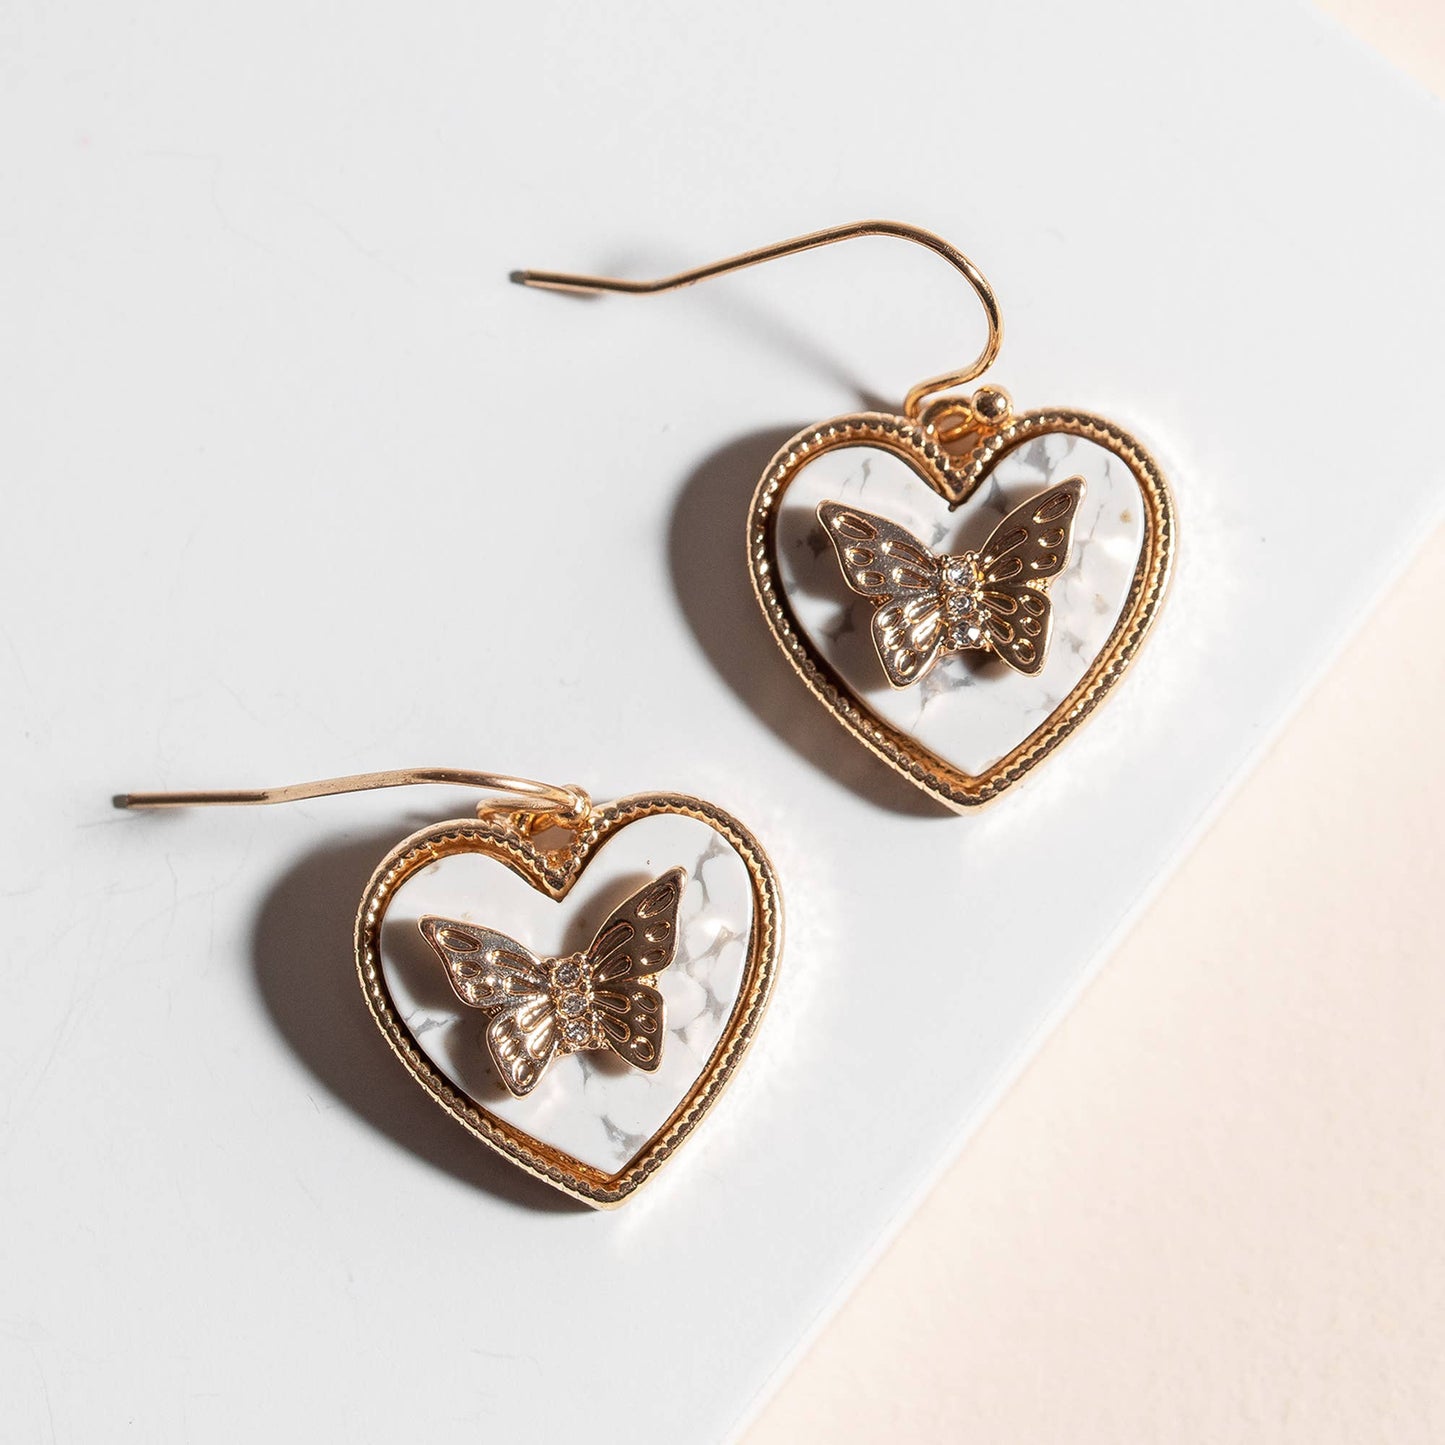 Stone Heart and Butterfly Earrings, White Marble